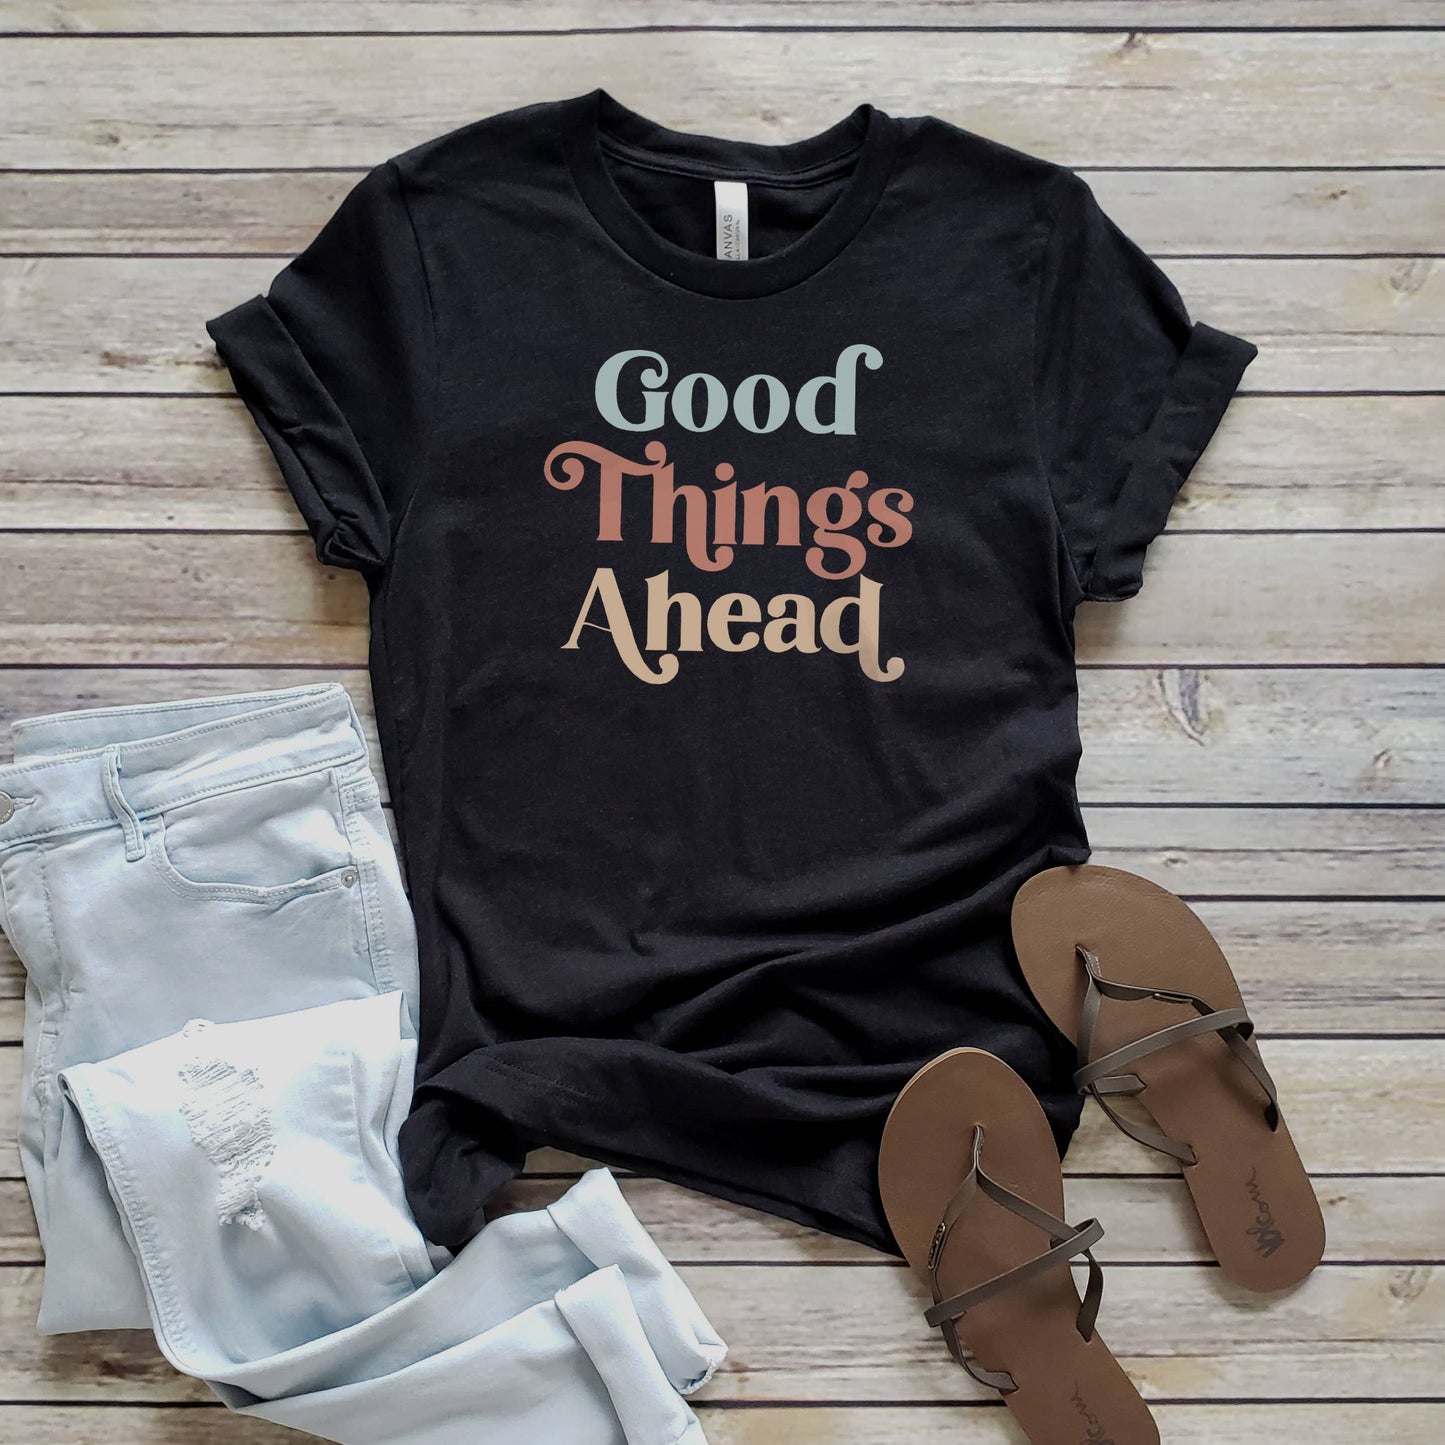 Good Things Ahead Graphic Tee in Heather Black | 4 sizes